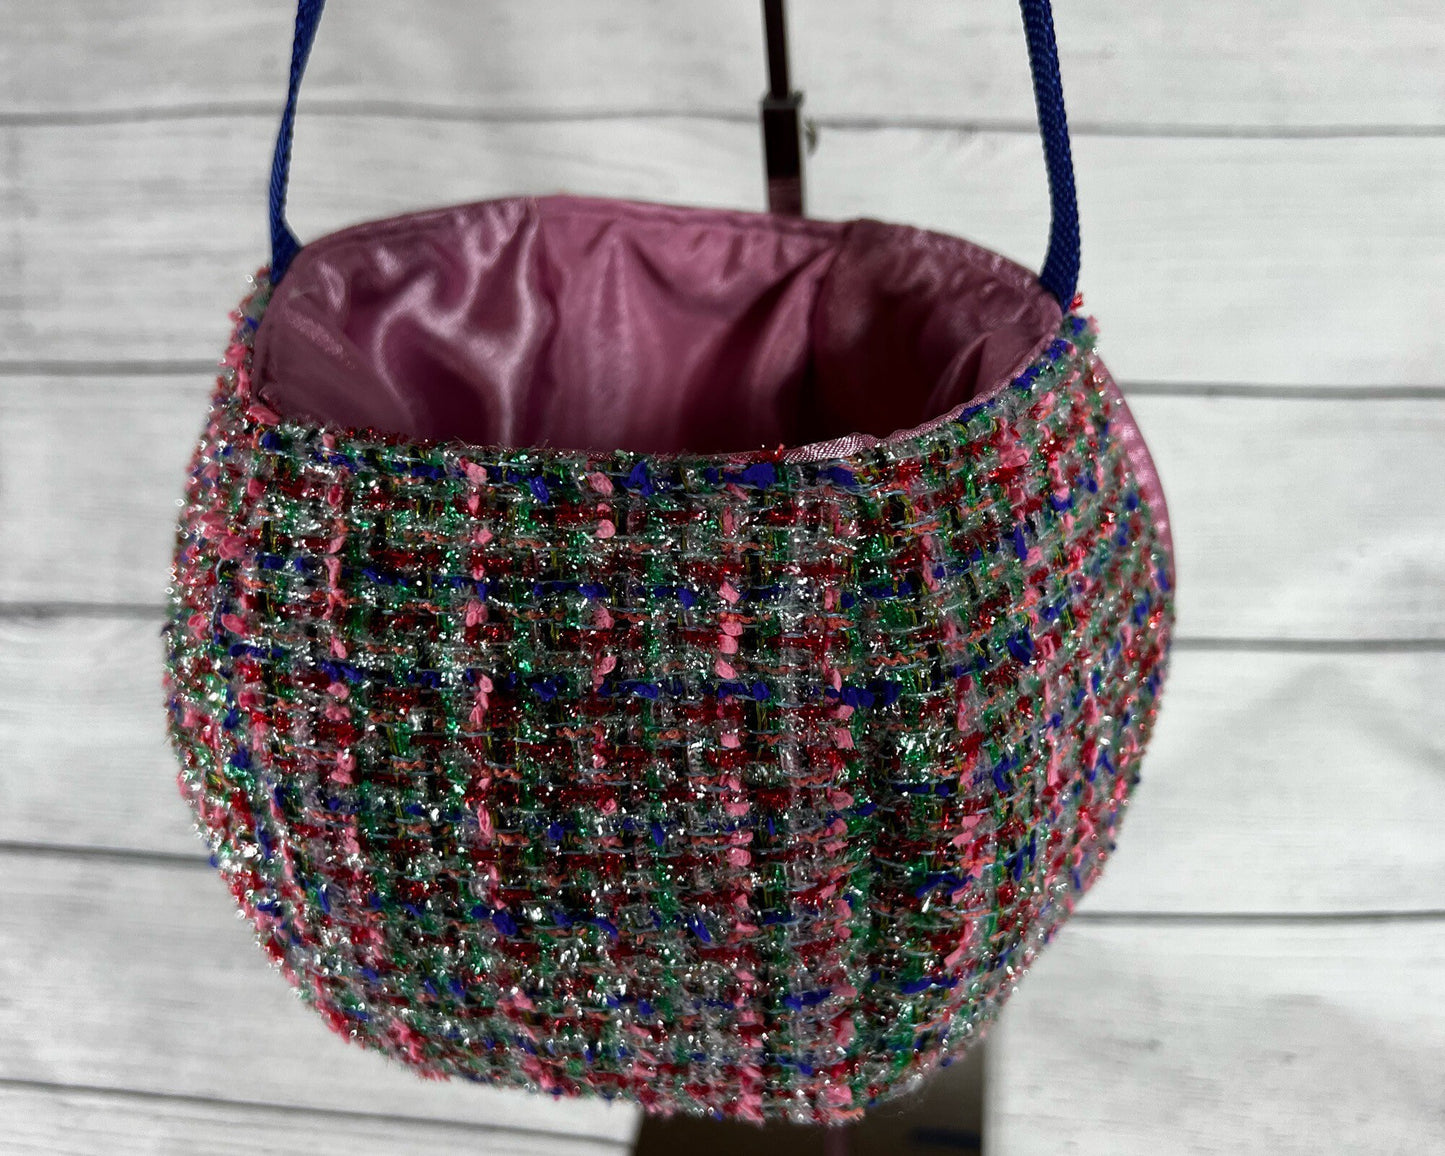 ONE OF A KIND Premium Unique Color Metallic Linton Tweed and Satin Tote Bag - Shiny -Everyday - Holiday - Easter - Halloween - Party -Gift